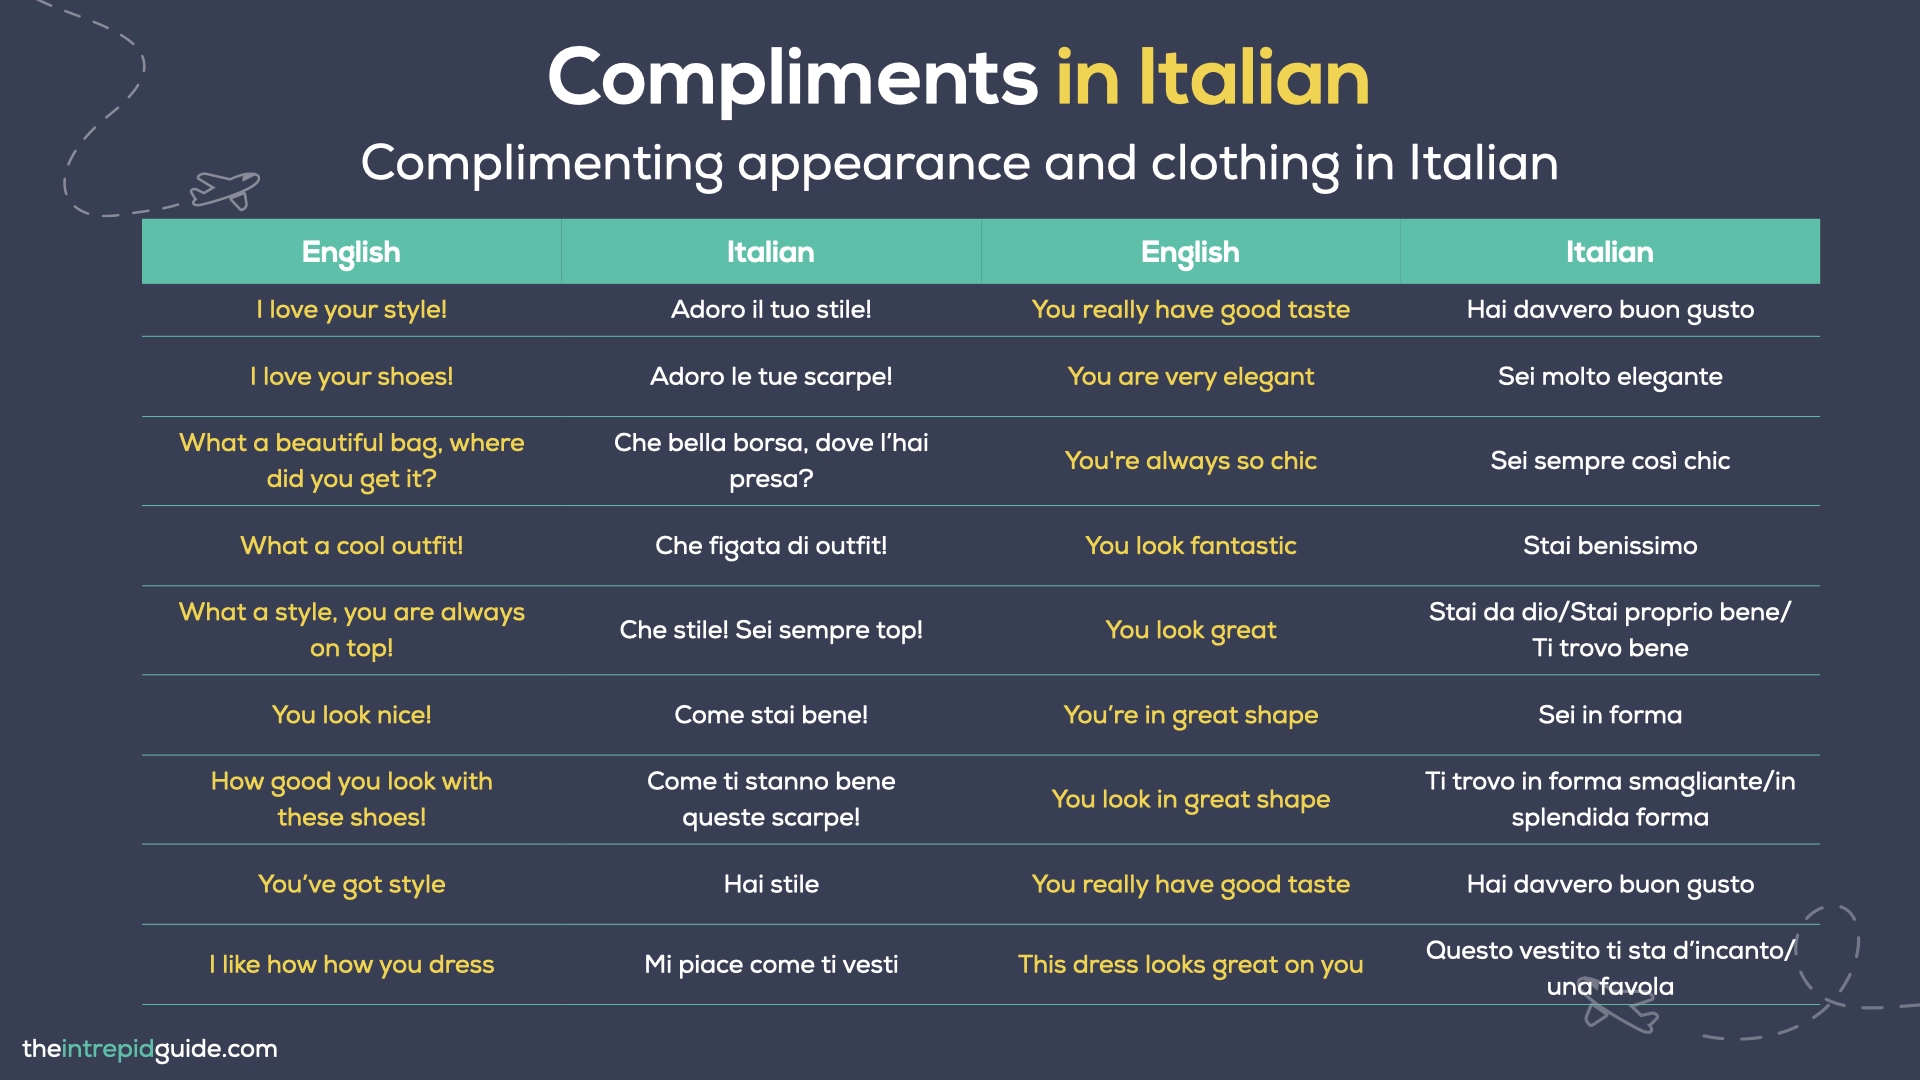 Compliments in Italian - Complimenting appearance and clothing in Italian